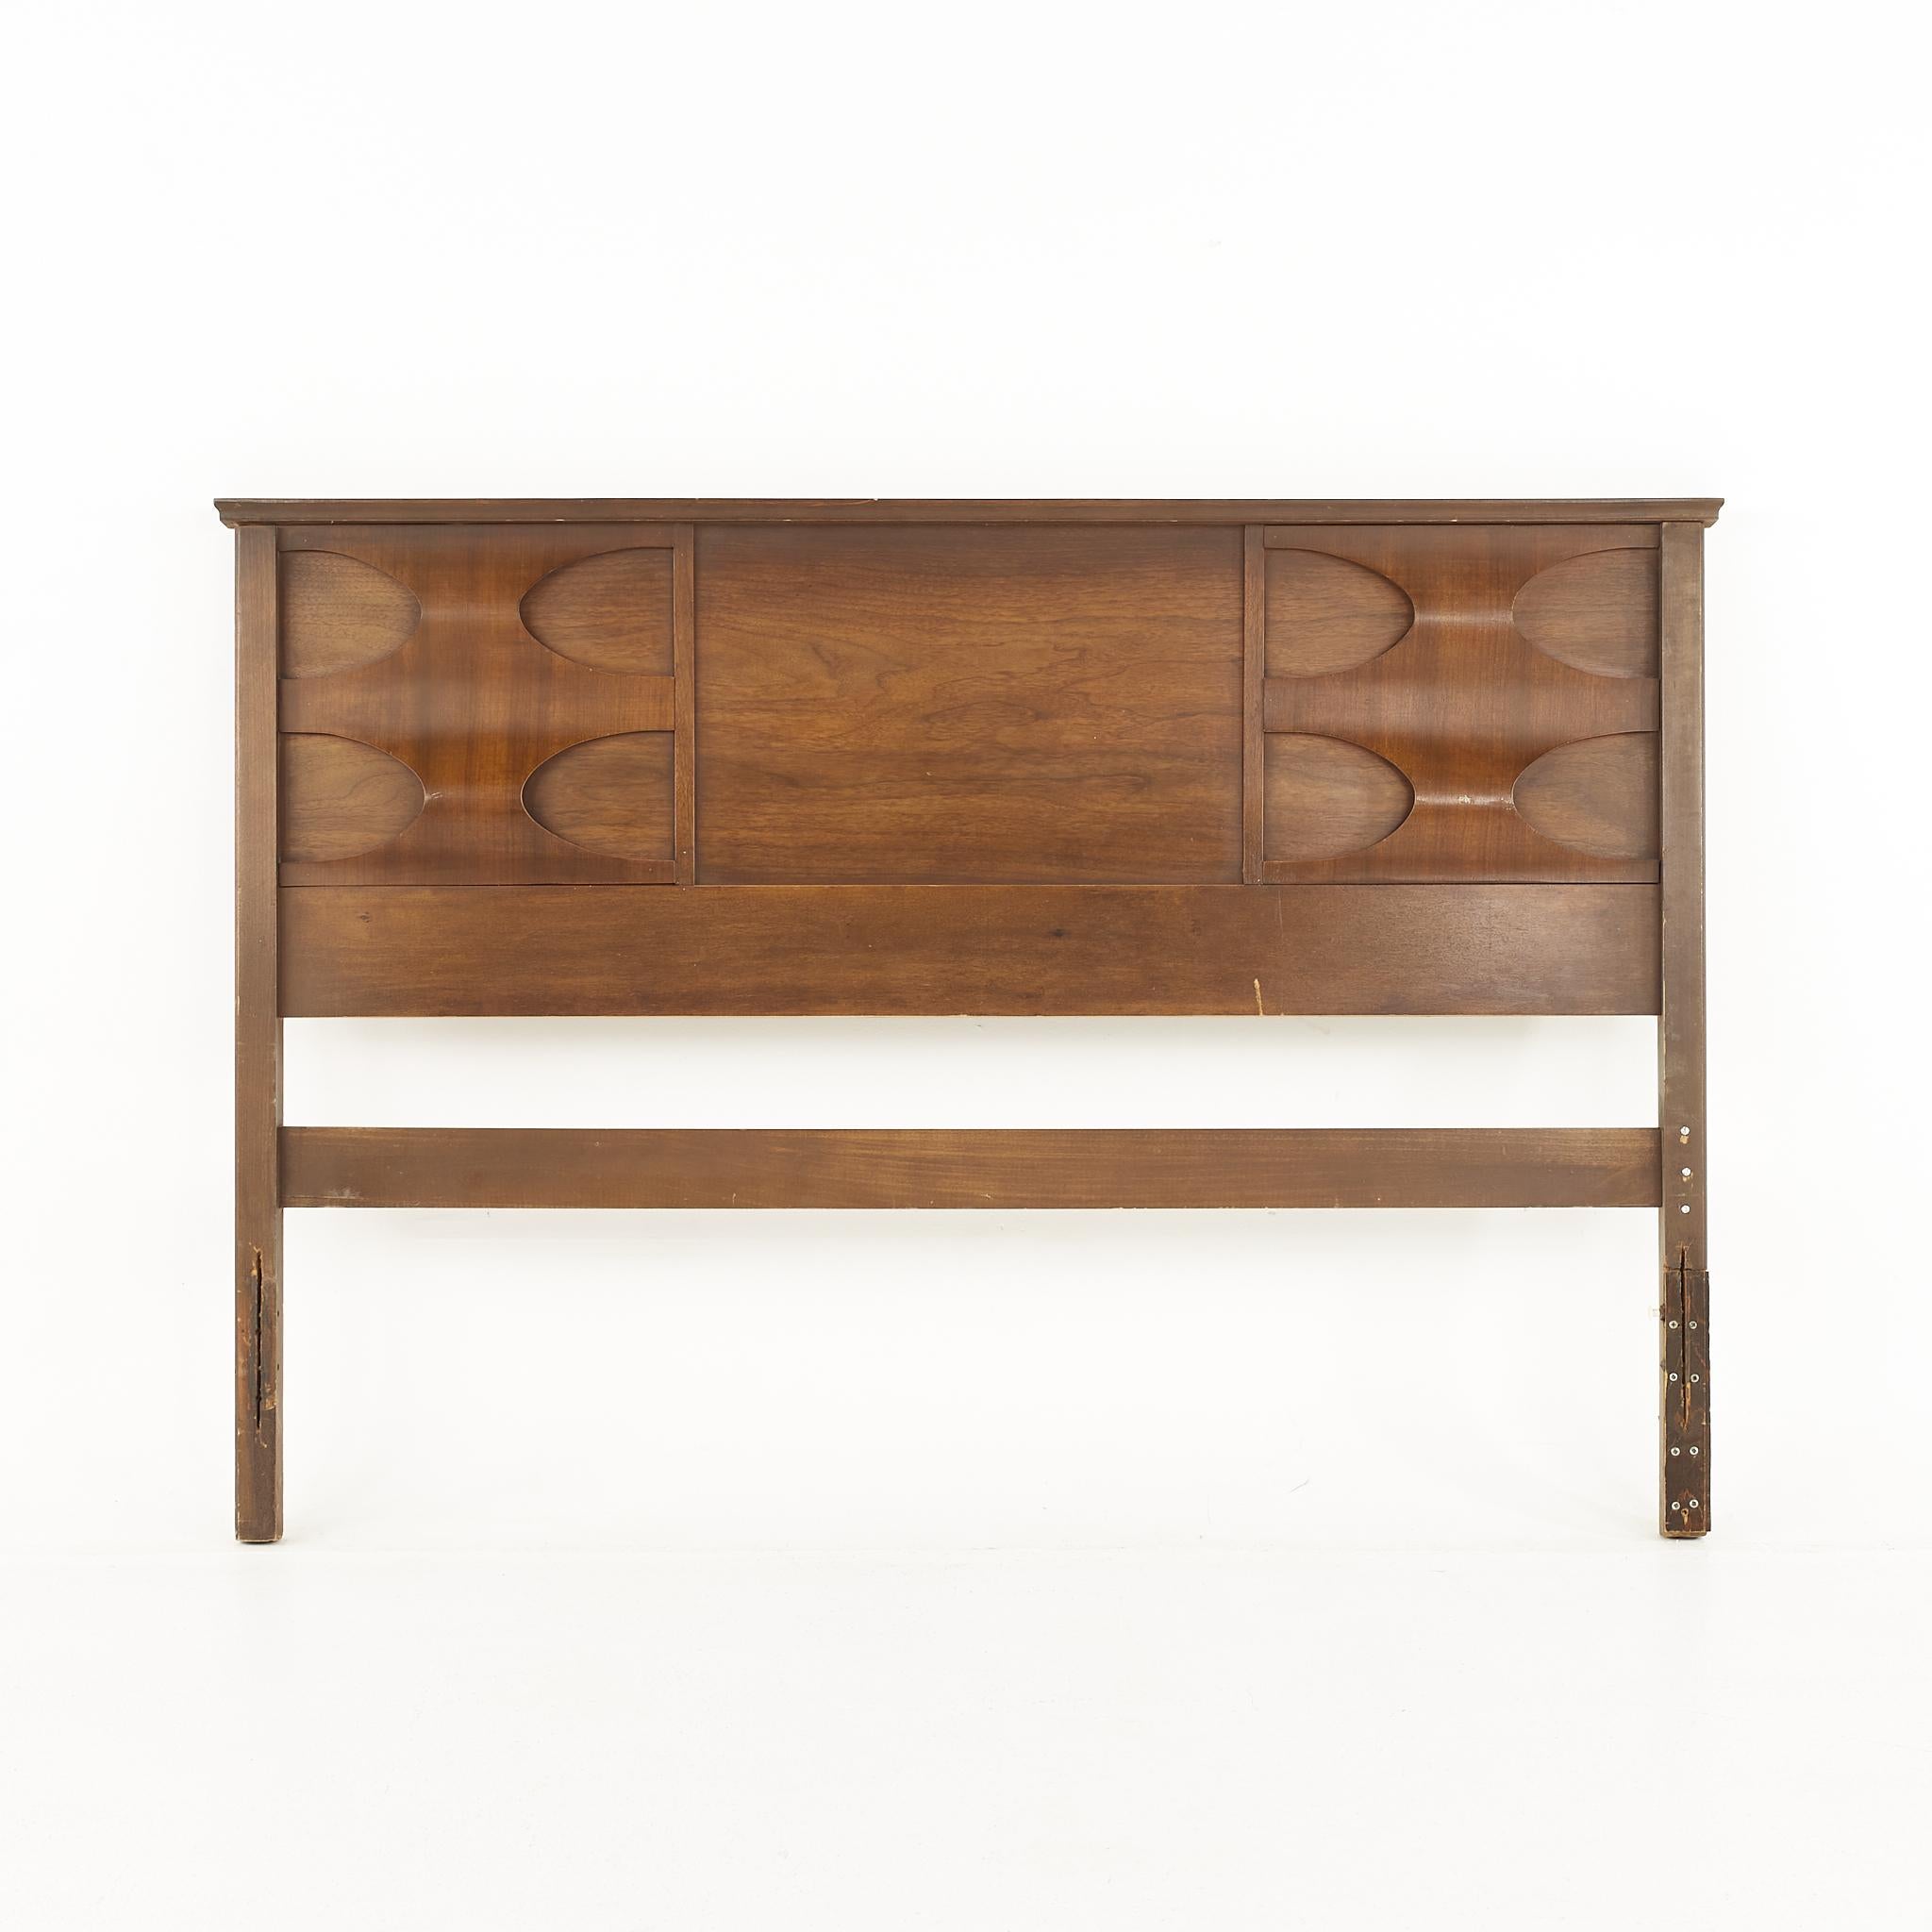 Broyhill Brasilia style Brutalist mid-century walnut full headboard

The headboard measures: 56.5 wide x 2 deep x 39.5 inches high

All pieces of furniture can be had in what we call restored vintage condition. That means the piece is restored